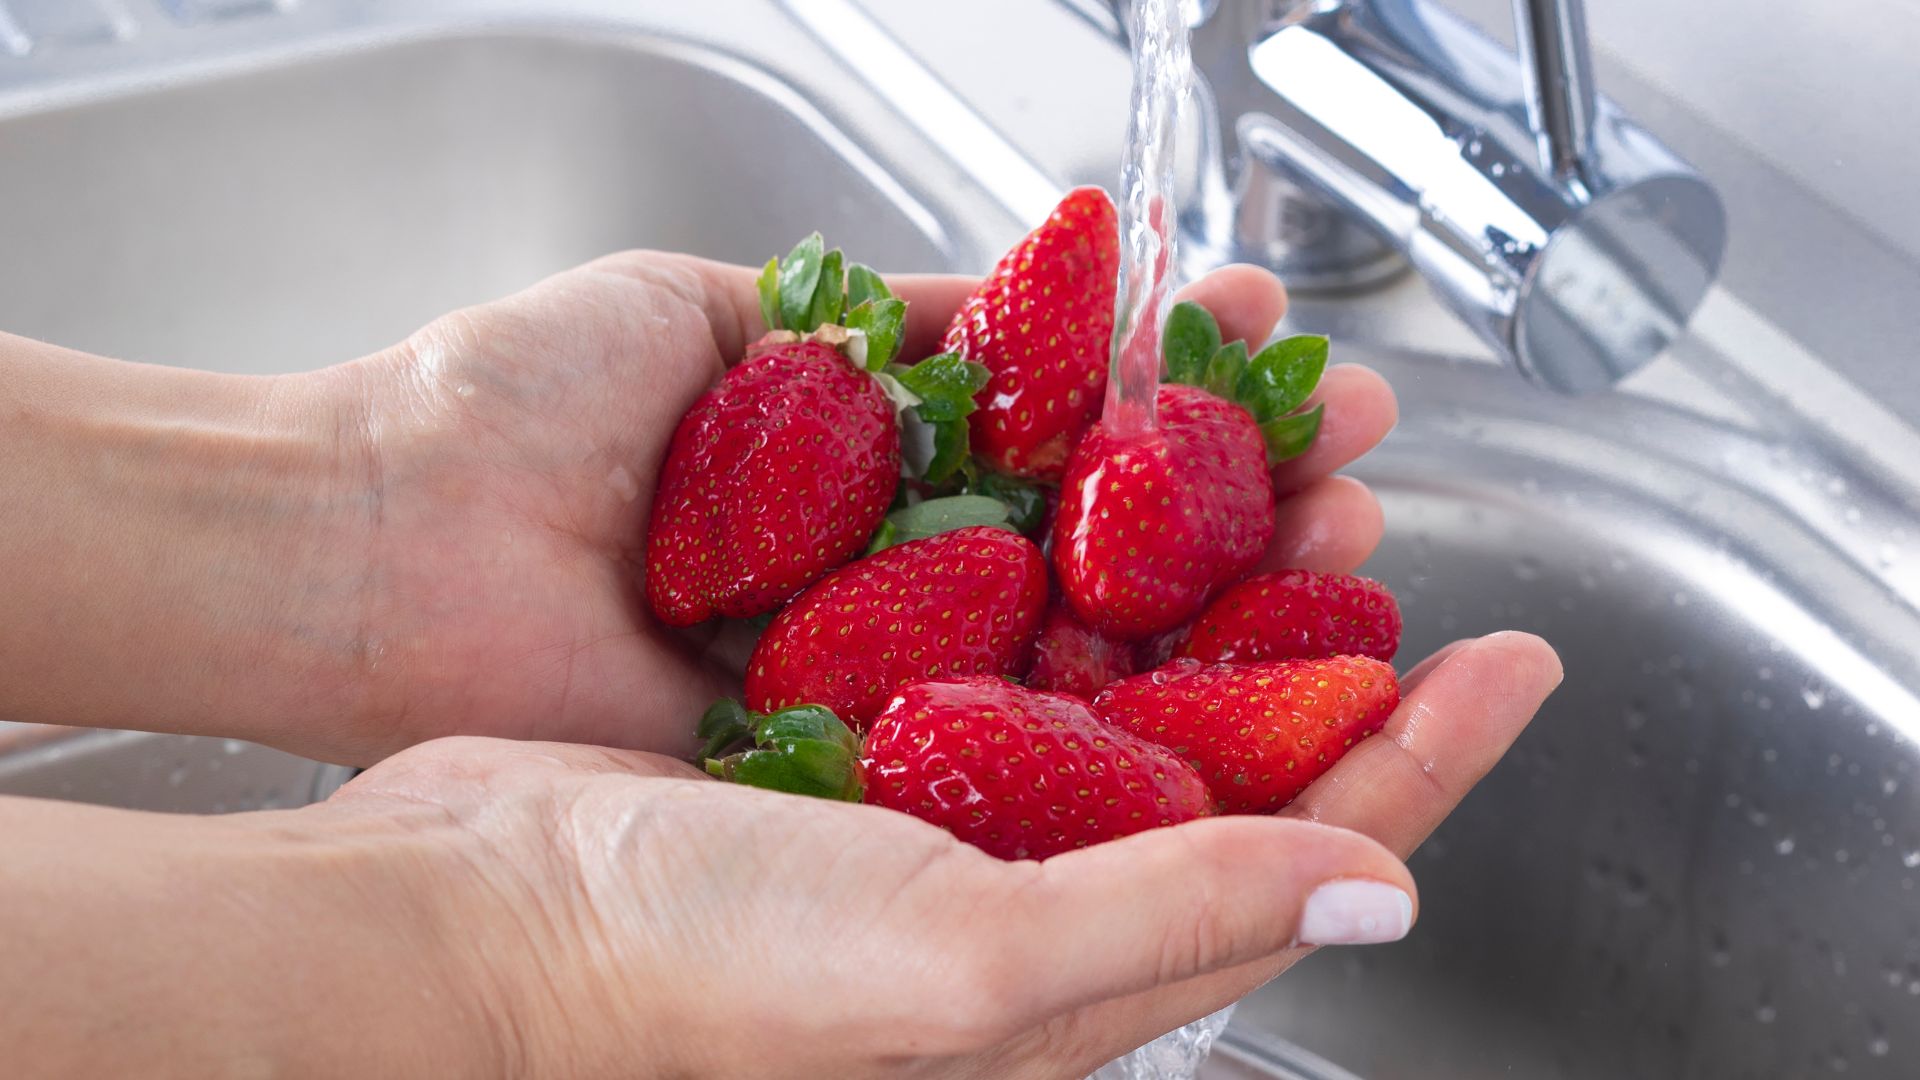 How to Clean Strawberries So They Last Longer